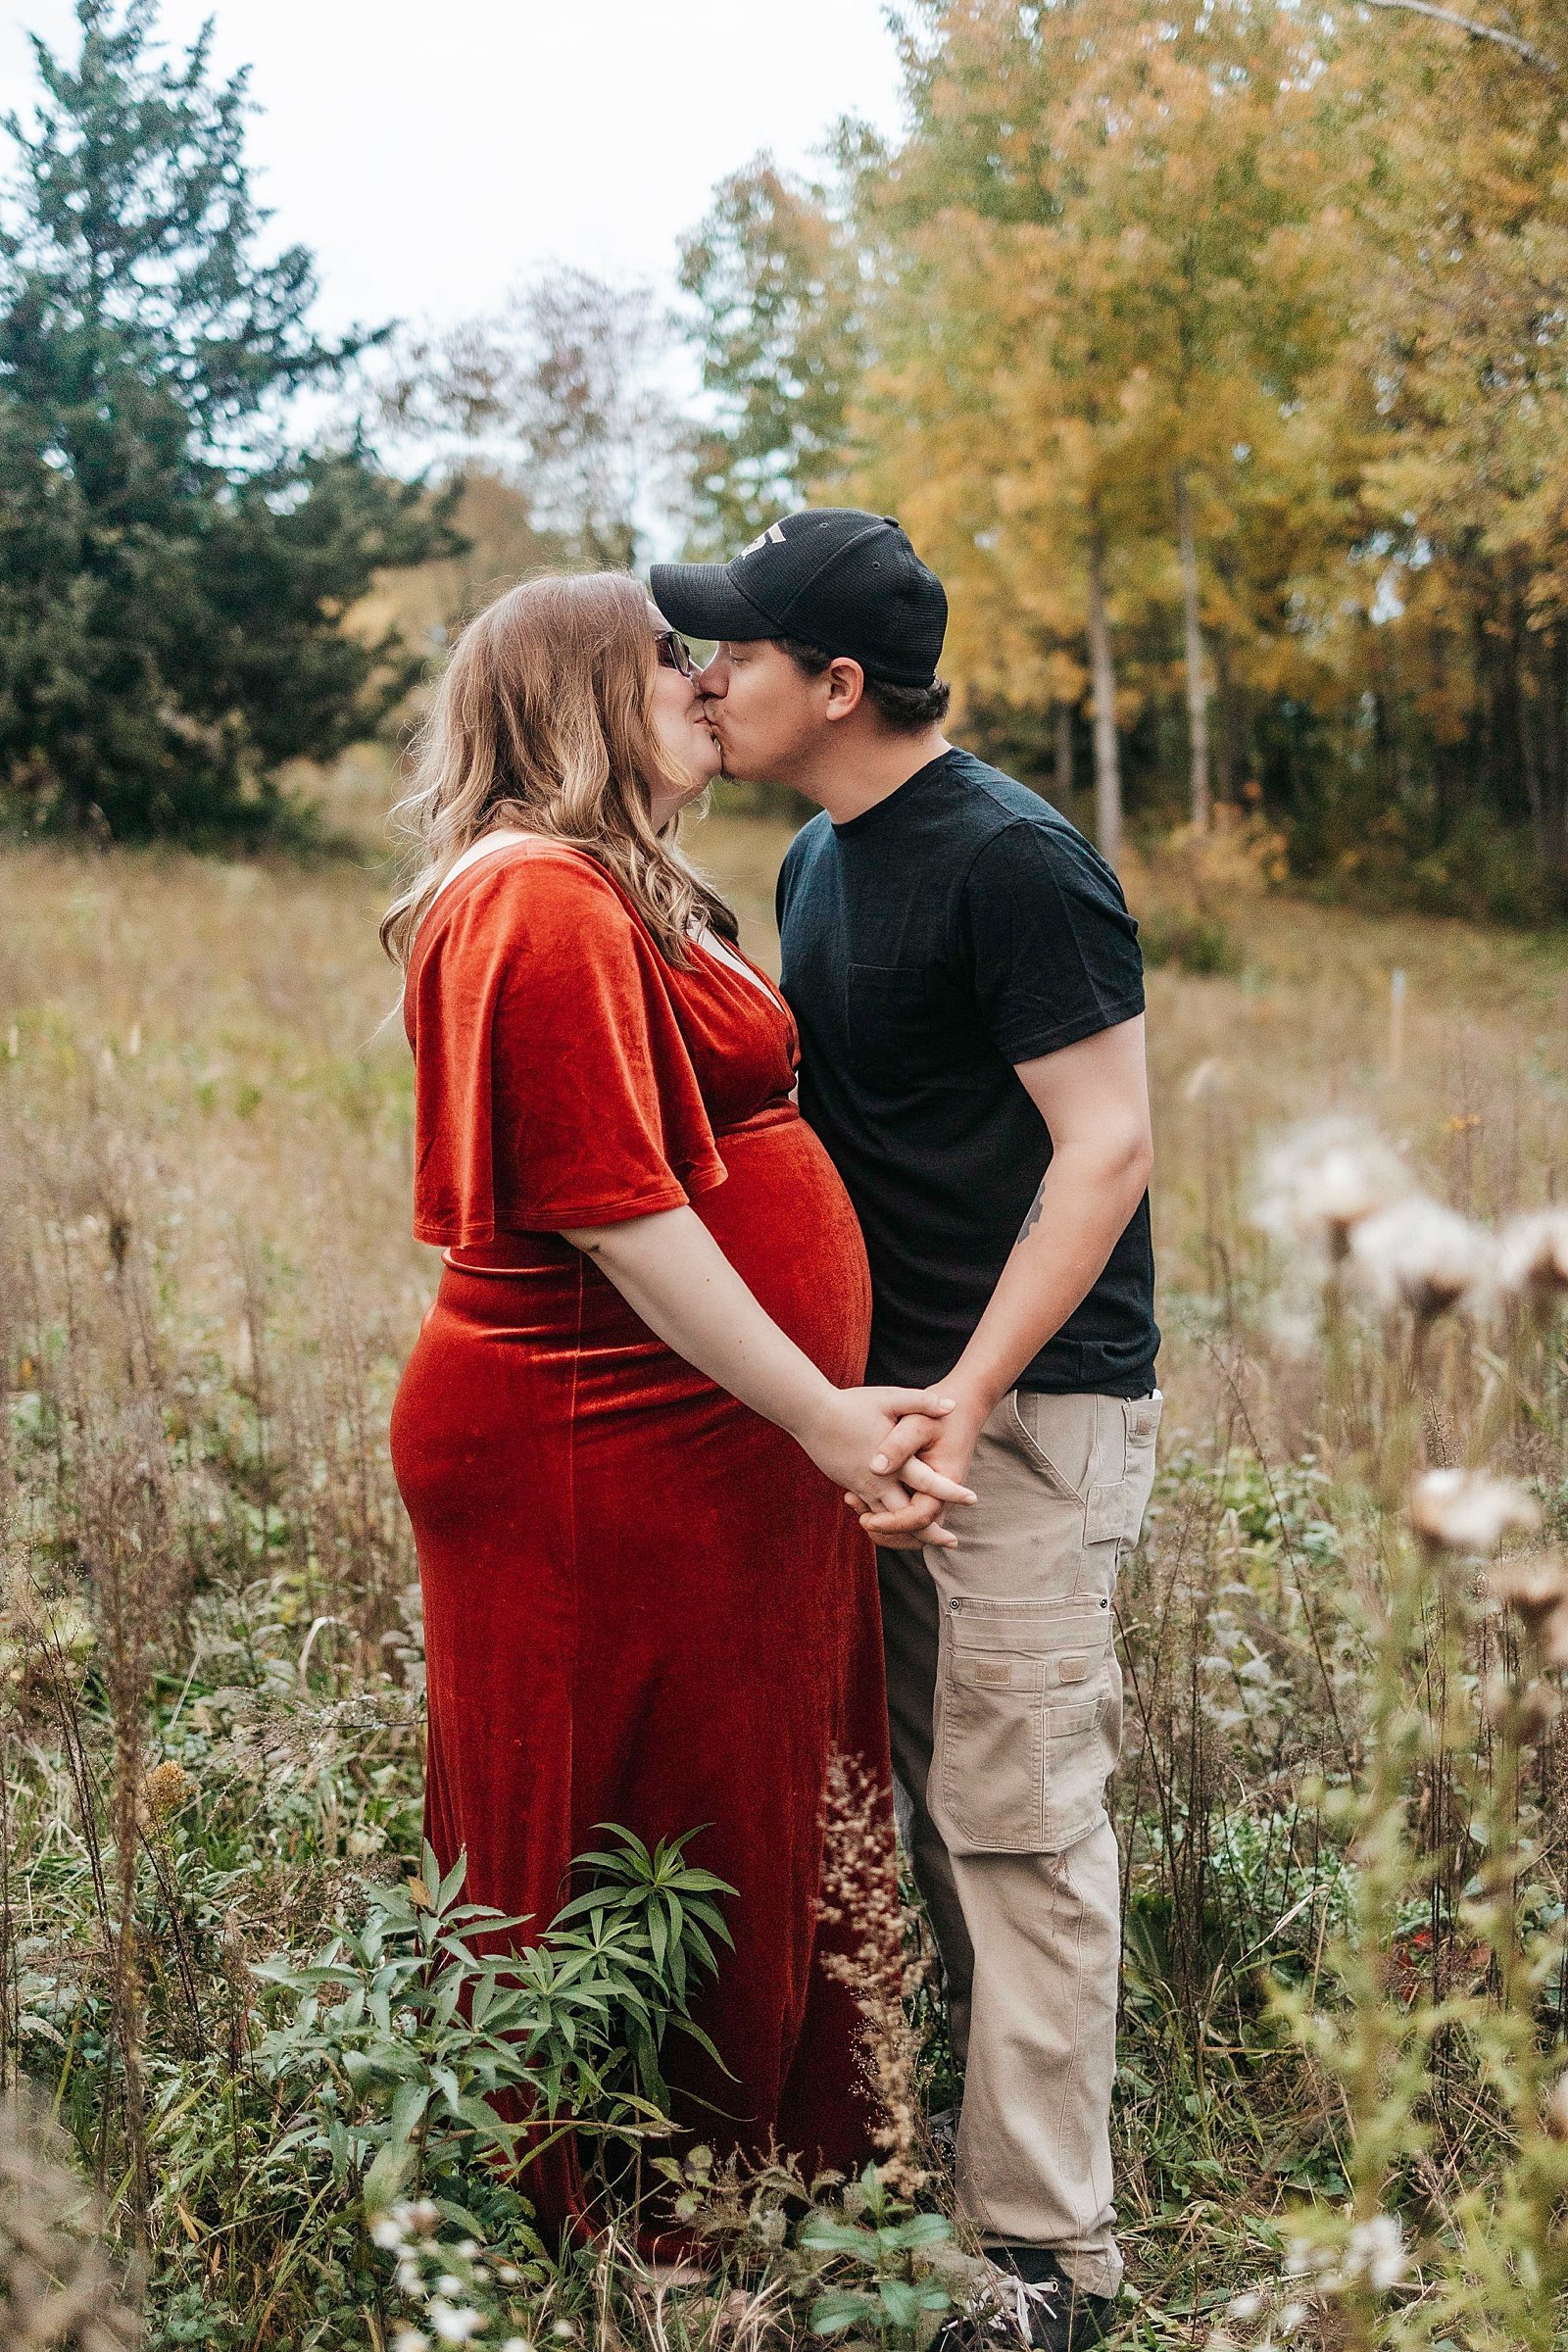  Husband kissing his pregnant wife in a field for their maternity photo shoot.  